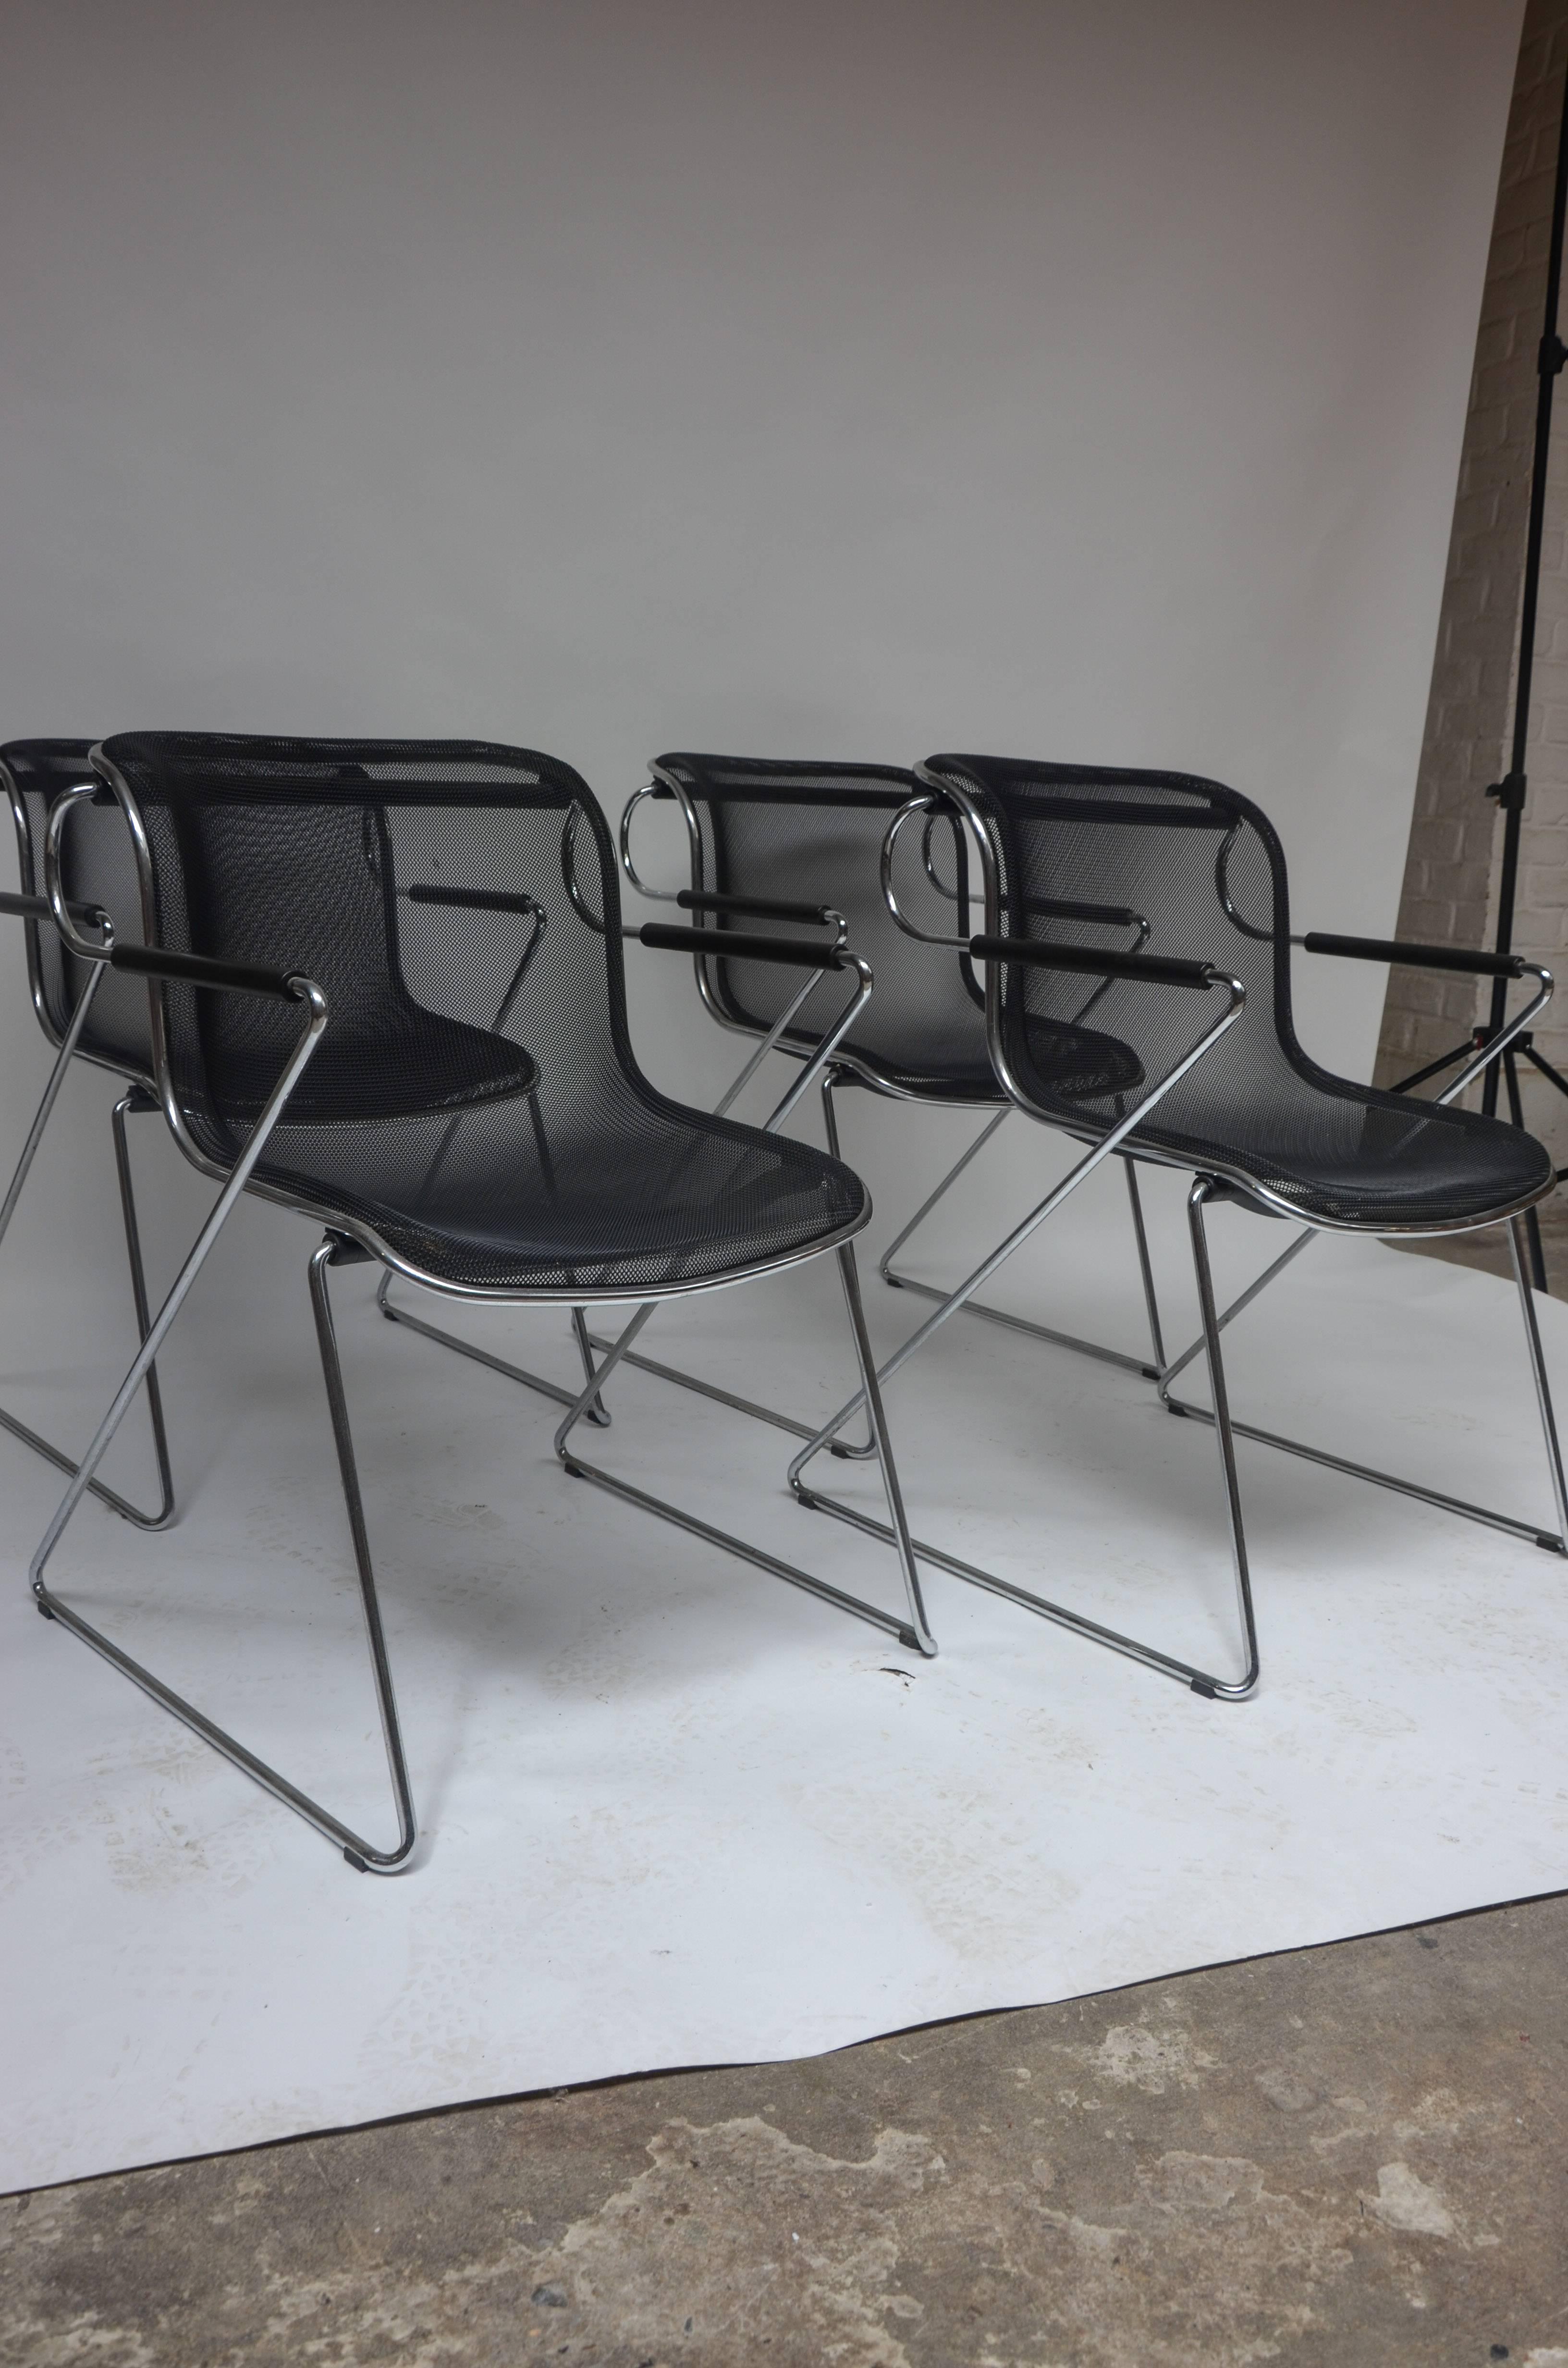 Set of four Penelope chairs designed by Charles Pollock for Castelli (1982). Constructed of chrome arms and legs with a steel wire sled seat sitting on a polyurethane shock absorbing tube, this design Classic is comfortable, has a beautiful